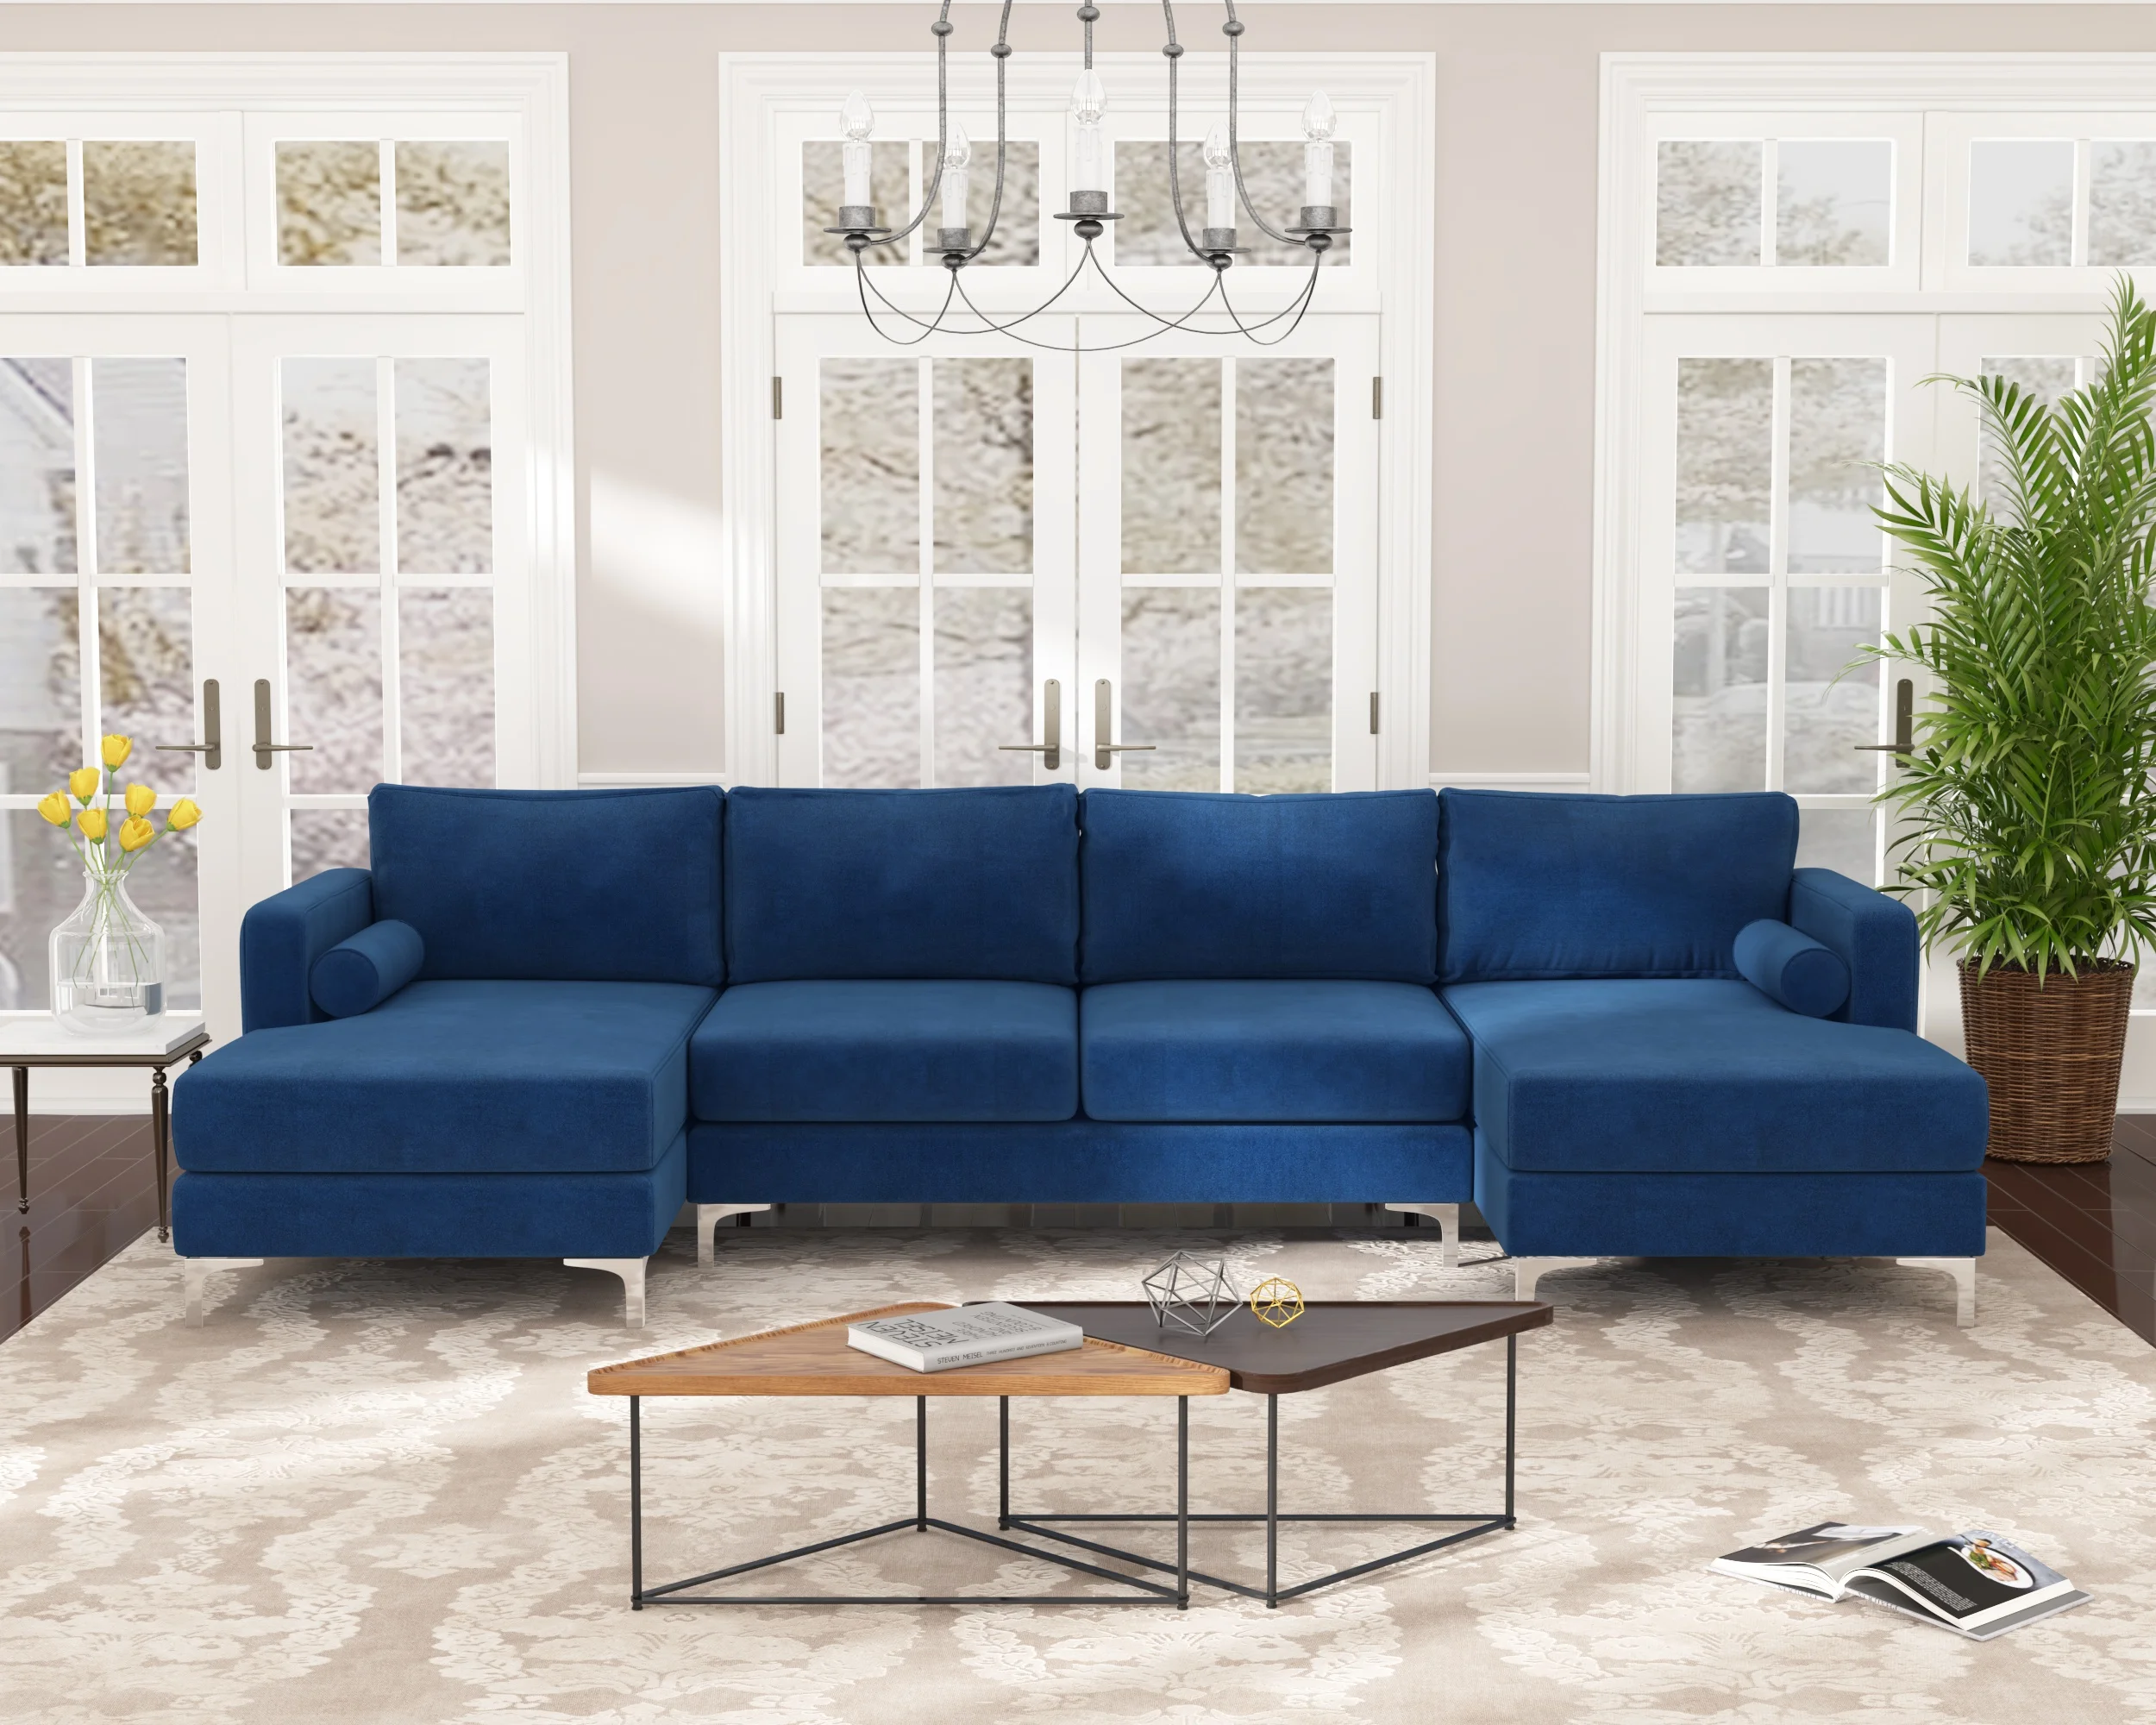 

Sectional Sofa with Two Pillows, U-Shape Upholstered Couch with Modern Elegant Velvet for Living Room Apartment